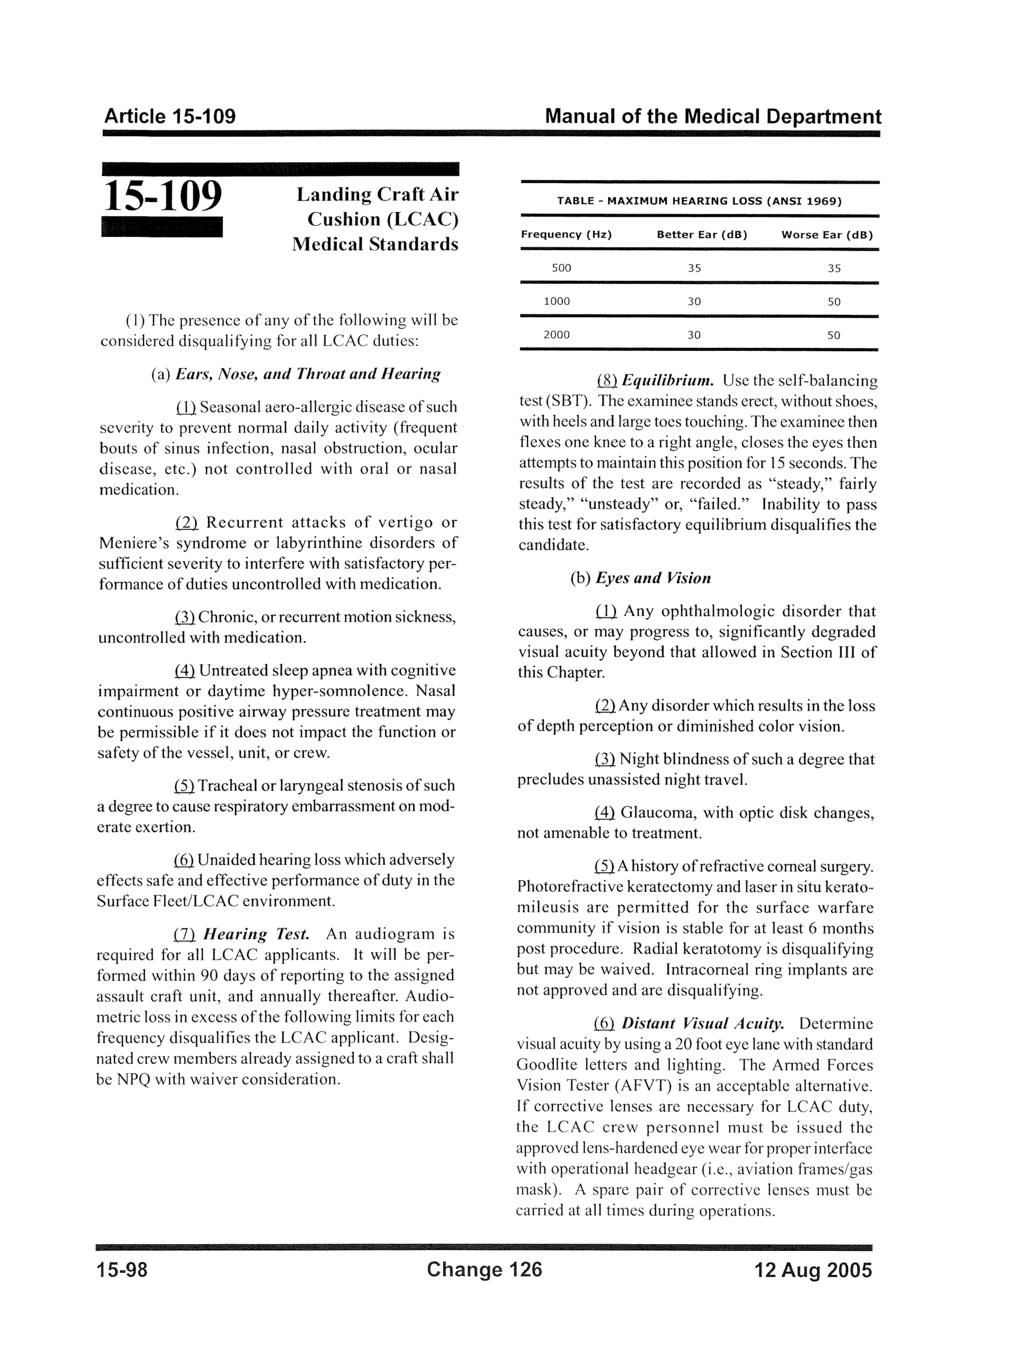 Article 15109 15109 Landing Craft Air Cushion (LCAC) Medical Standards (1) The presence of any of the following will be considered disqualifying for all LCAC duties: (a) Ears, Nose, and Throat and